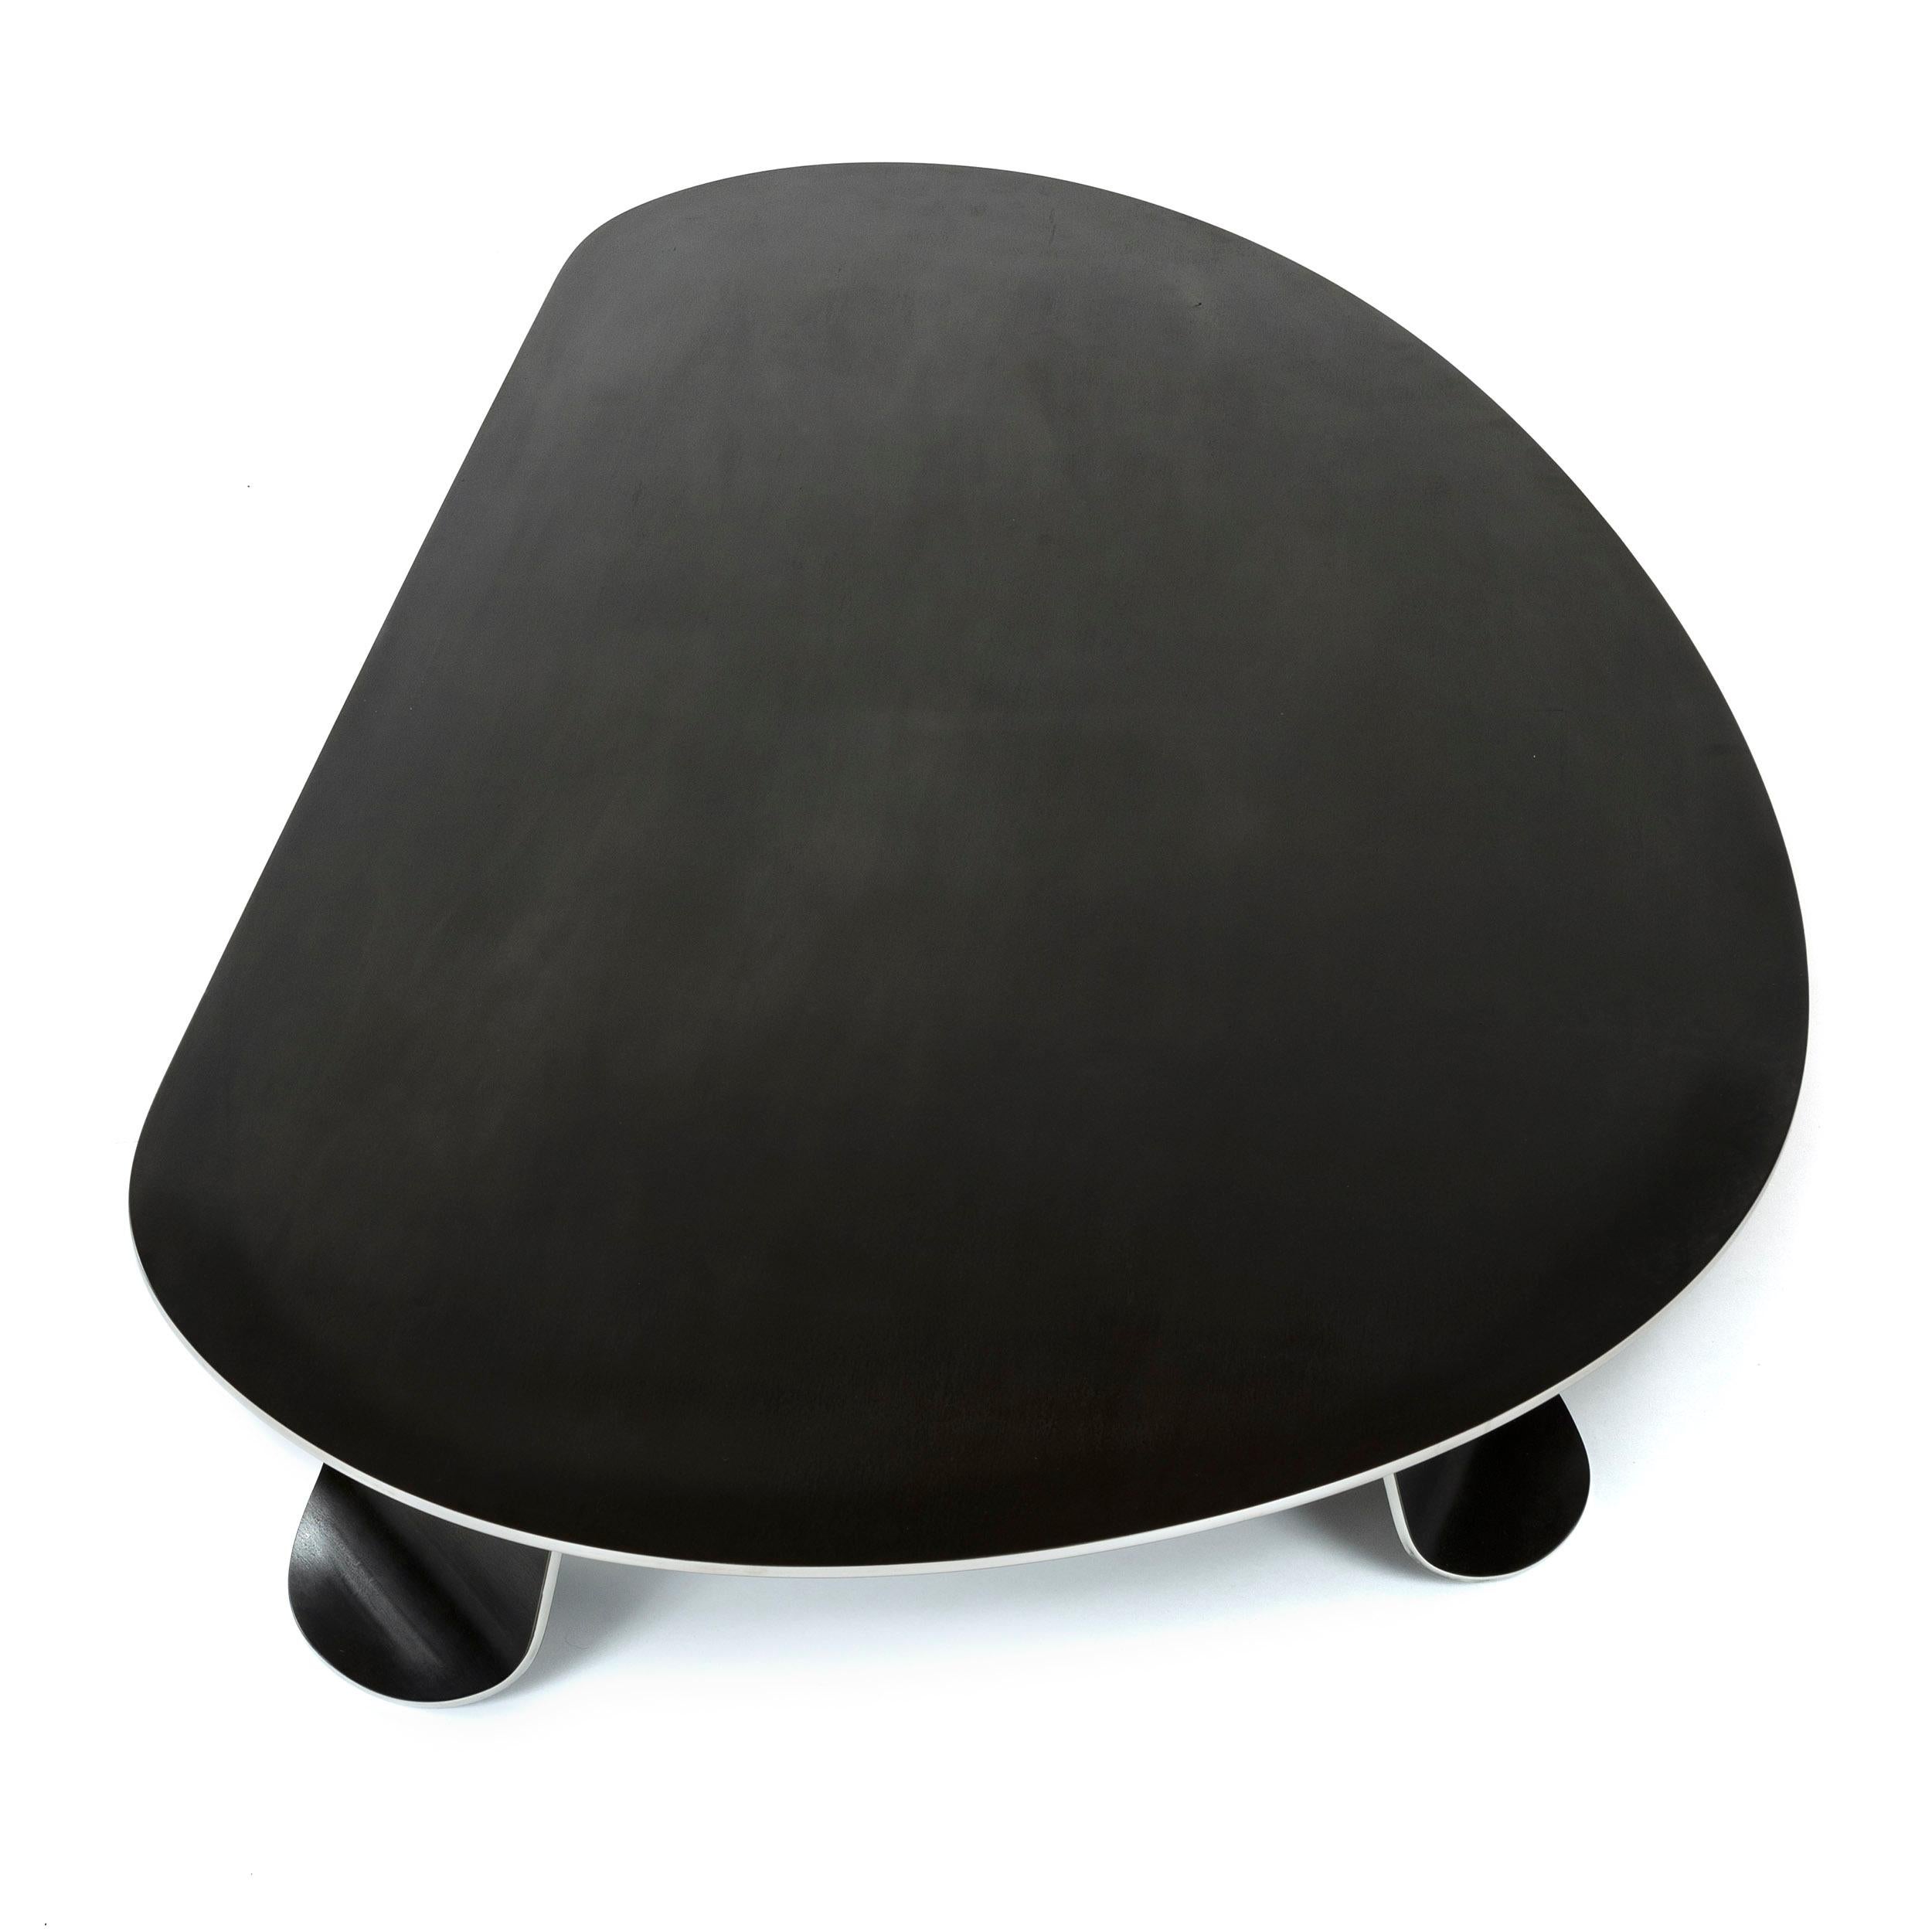 Wyeth Chrysalis Table No. 1 in Blackened Stainless Steel with Polished Edges For Sale 5